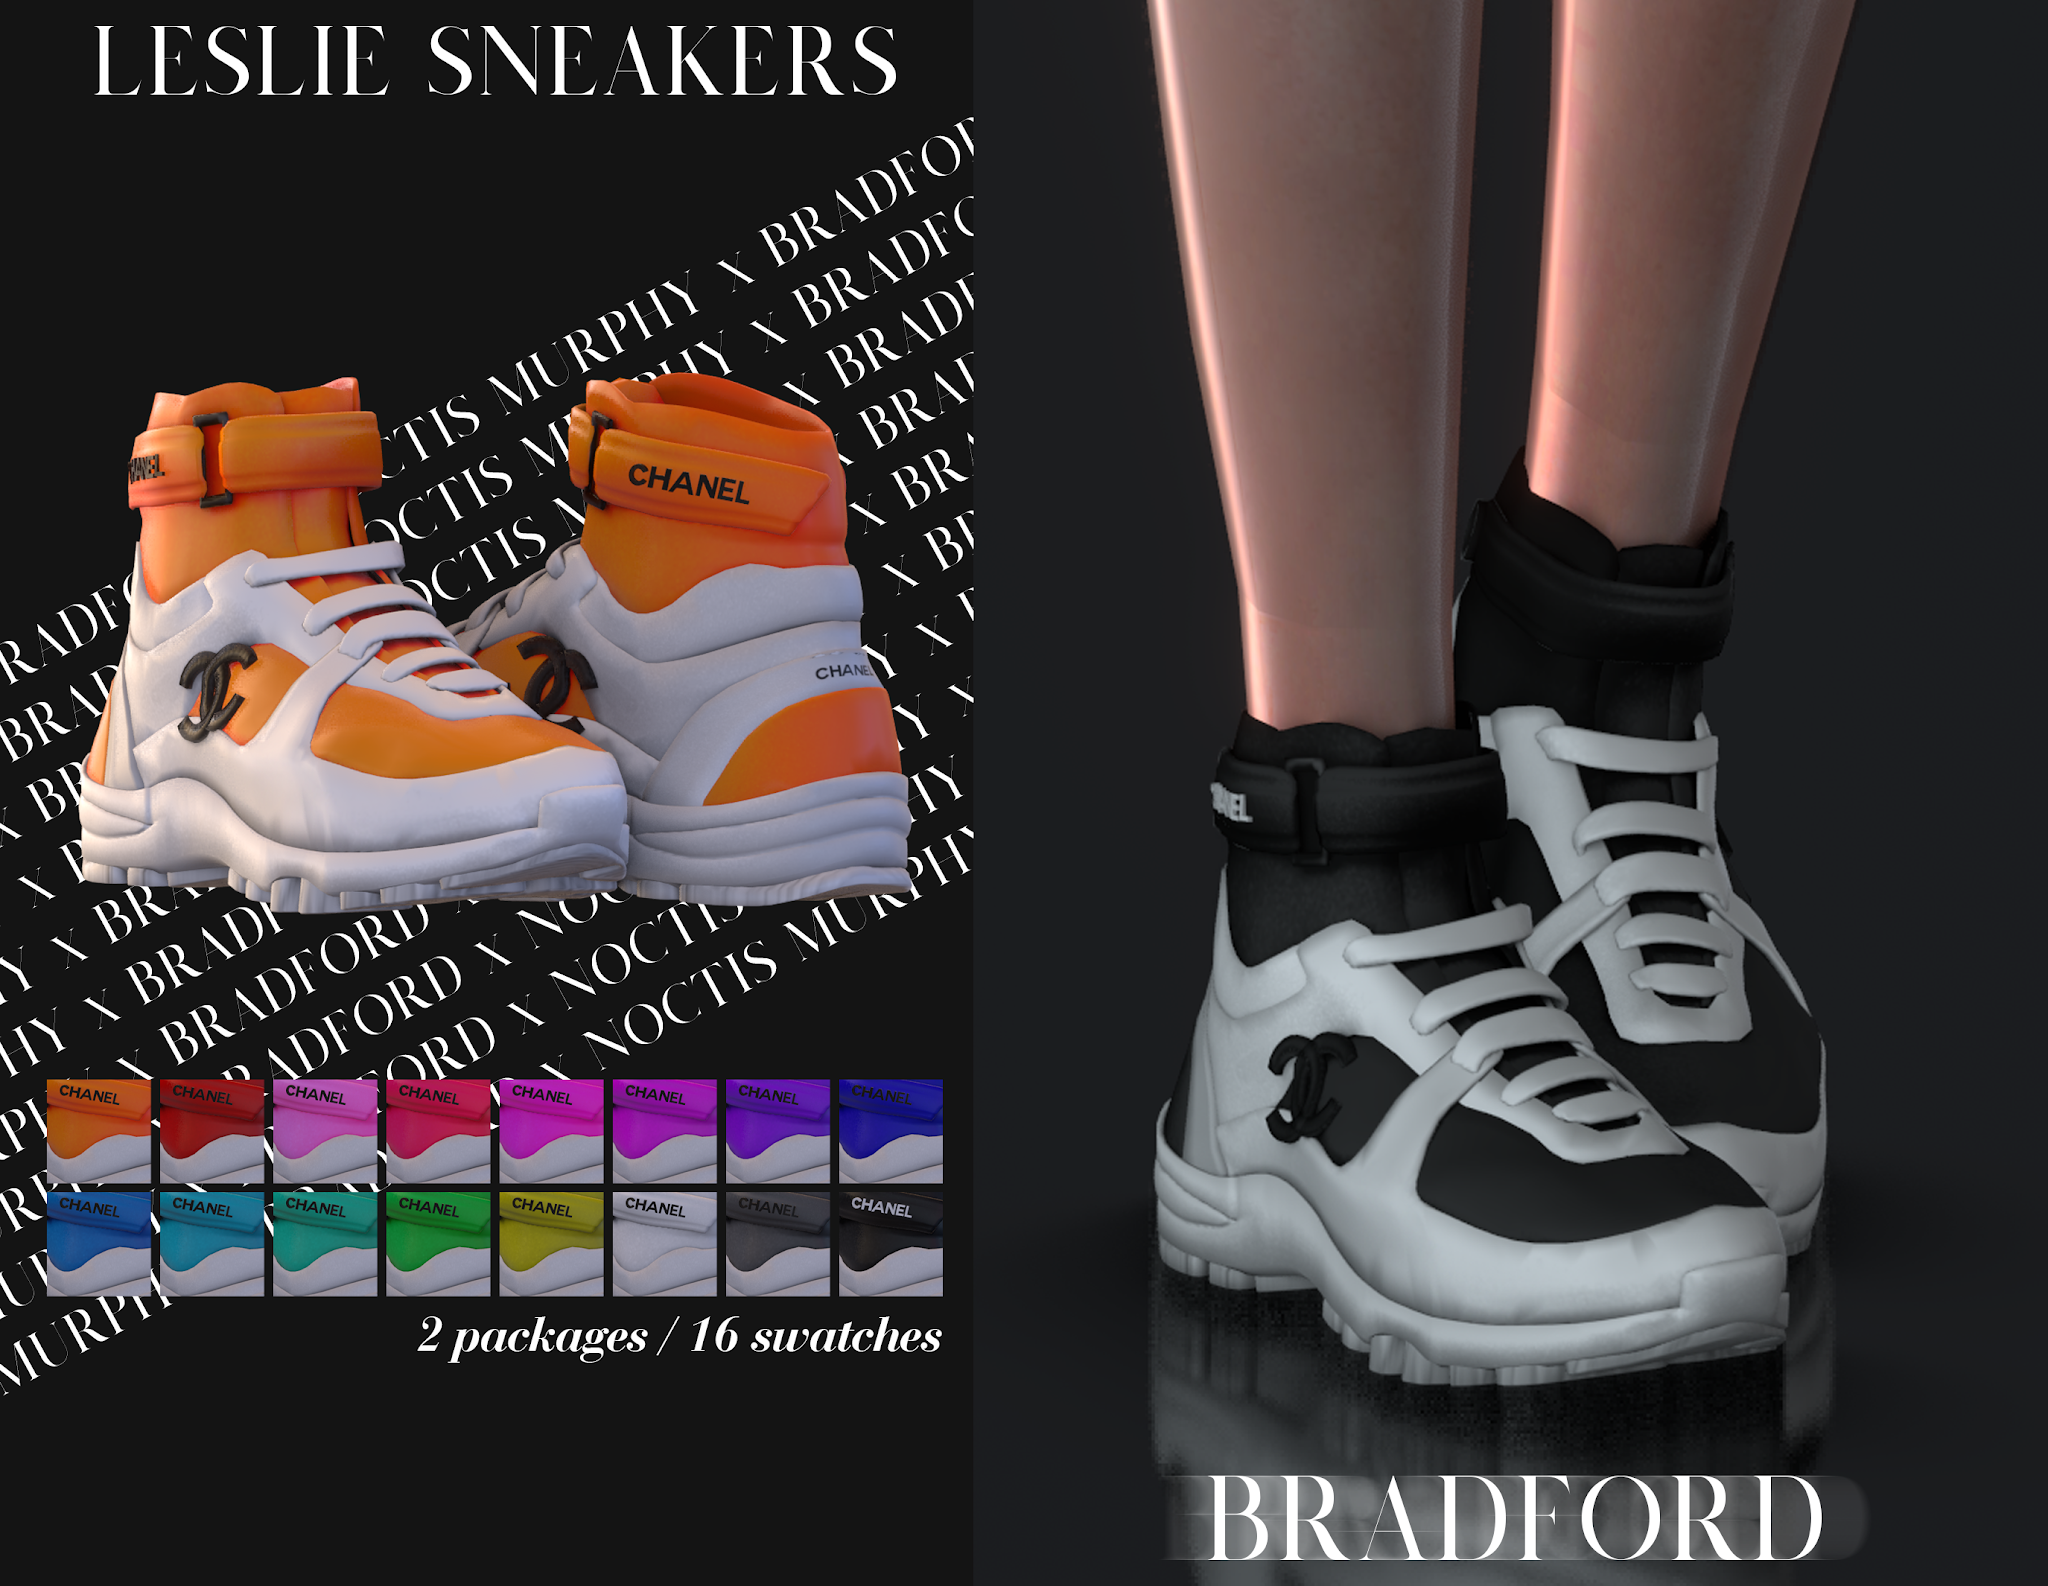 Симс 4 мод кроссовки. Nike Sneakers for SIMS 4. SP Sneakers SIMS 4. SIMS 4 Chanel Shoes. SIMS 4 female Sport Sneakers.